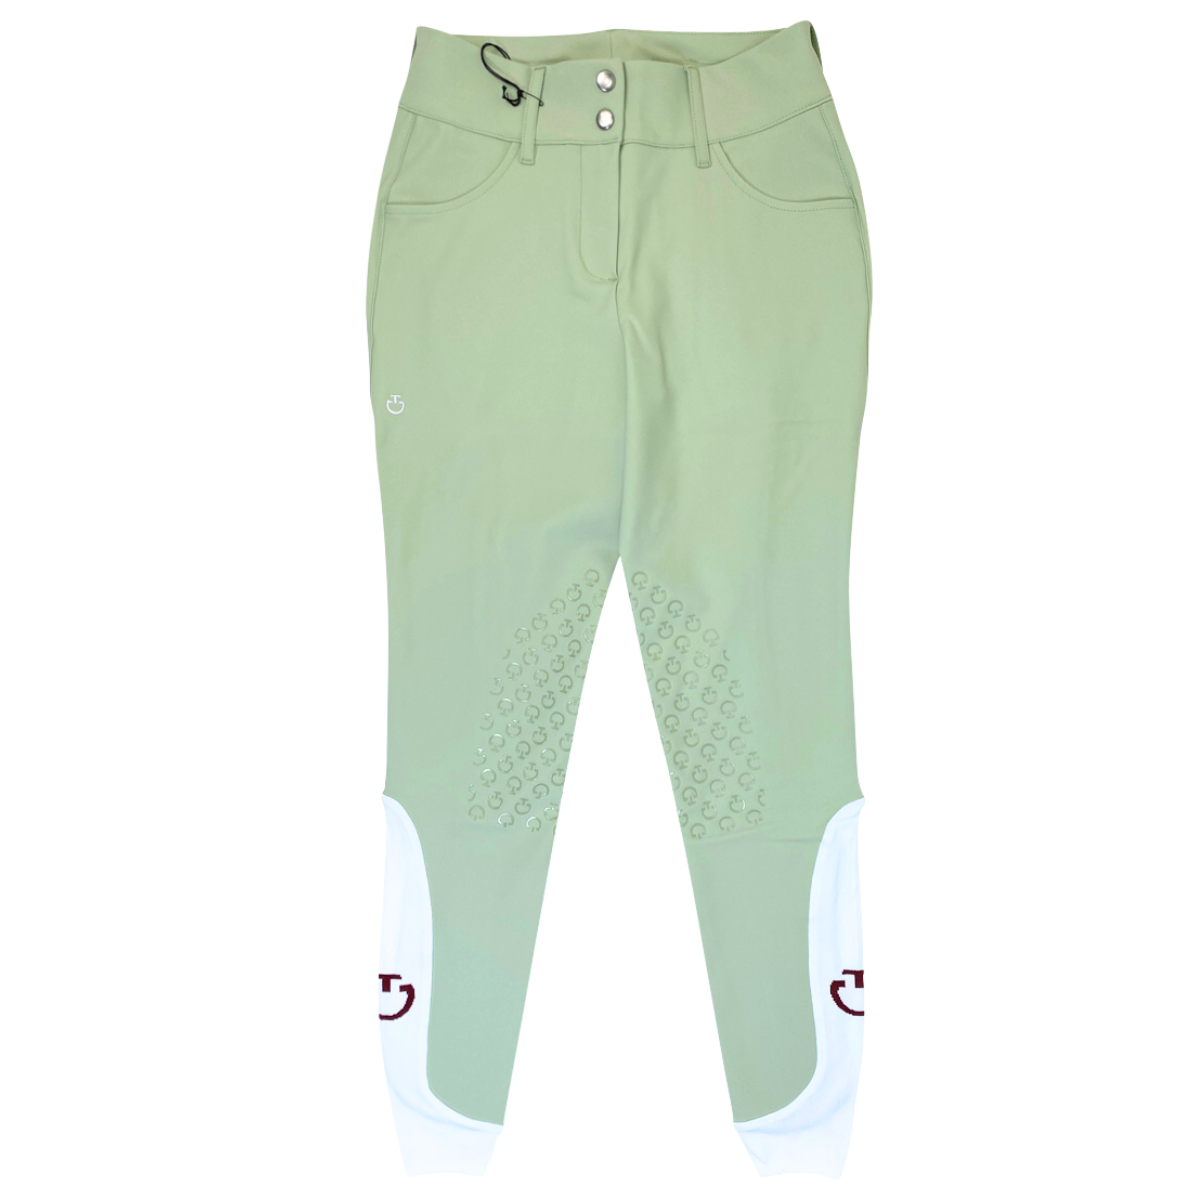 Cavalleria Toscana 'American' High Rise Jumping Breeches in Hunter Spring